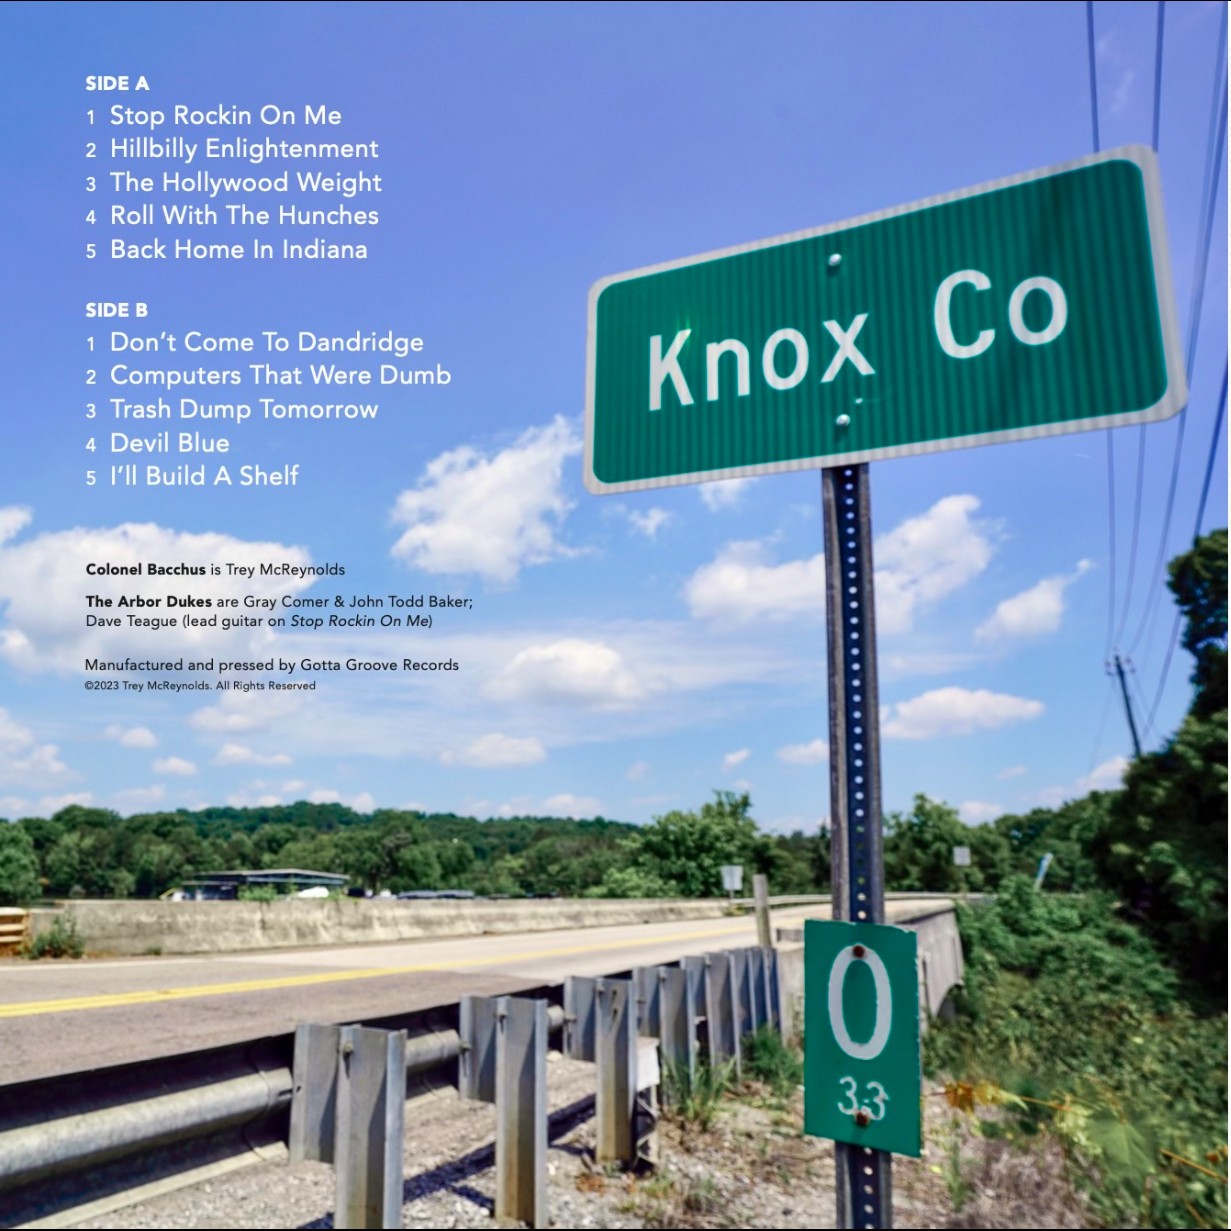 Back album art shows a highway from the outside of a railing, with a street sign reading “Knox Co.” Song list reads: “SIDE A – 1. Stop Rockin On Me 2. Hillbilly Enlightenment 3. The Hollywood Weight 4. Roll With The Hunches 5. Back Home in Indiana. SIDE B – 1. Don’t Come to Dandridge 2. Computers That Were Dumb 3. Trash Dump Tomorrow 4. Devil Blue 5. I’ll Build A Shelf - Colonel Bacchus is Trey McReynolds – The Arbor Dukes are Gray Comer & John Todd Baker; Dave Teague (lead guitar on Stop Rockin On Me) – Manufactured and pressed by Gotta Groove Records ©2023 Trey McReynolds. All Rights Reserved.” 